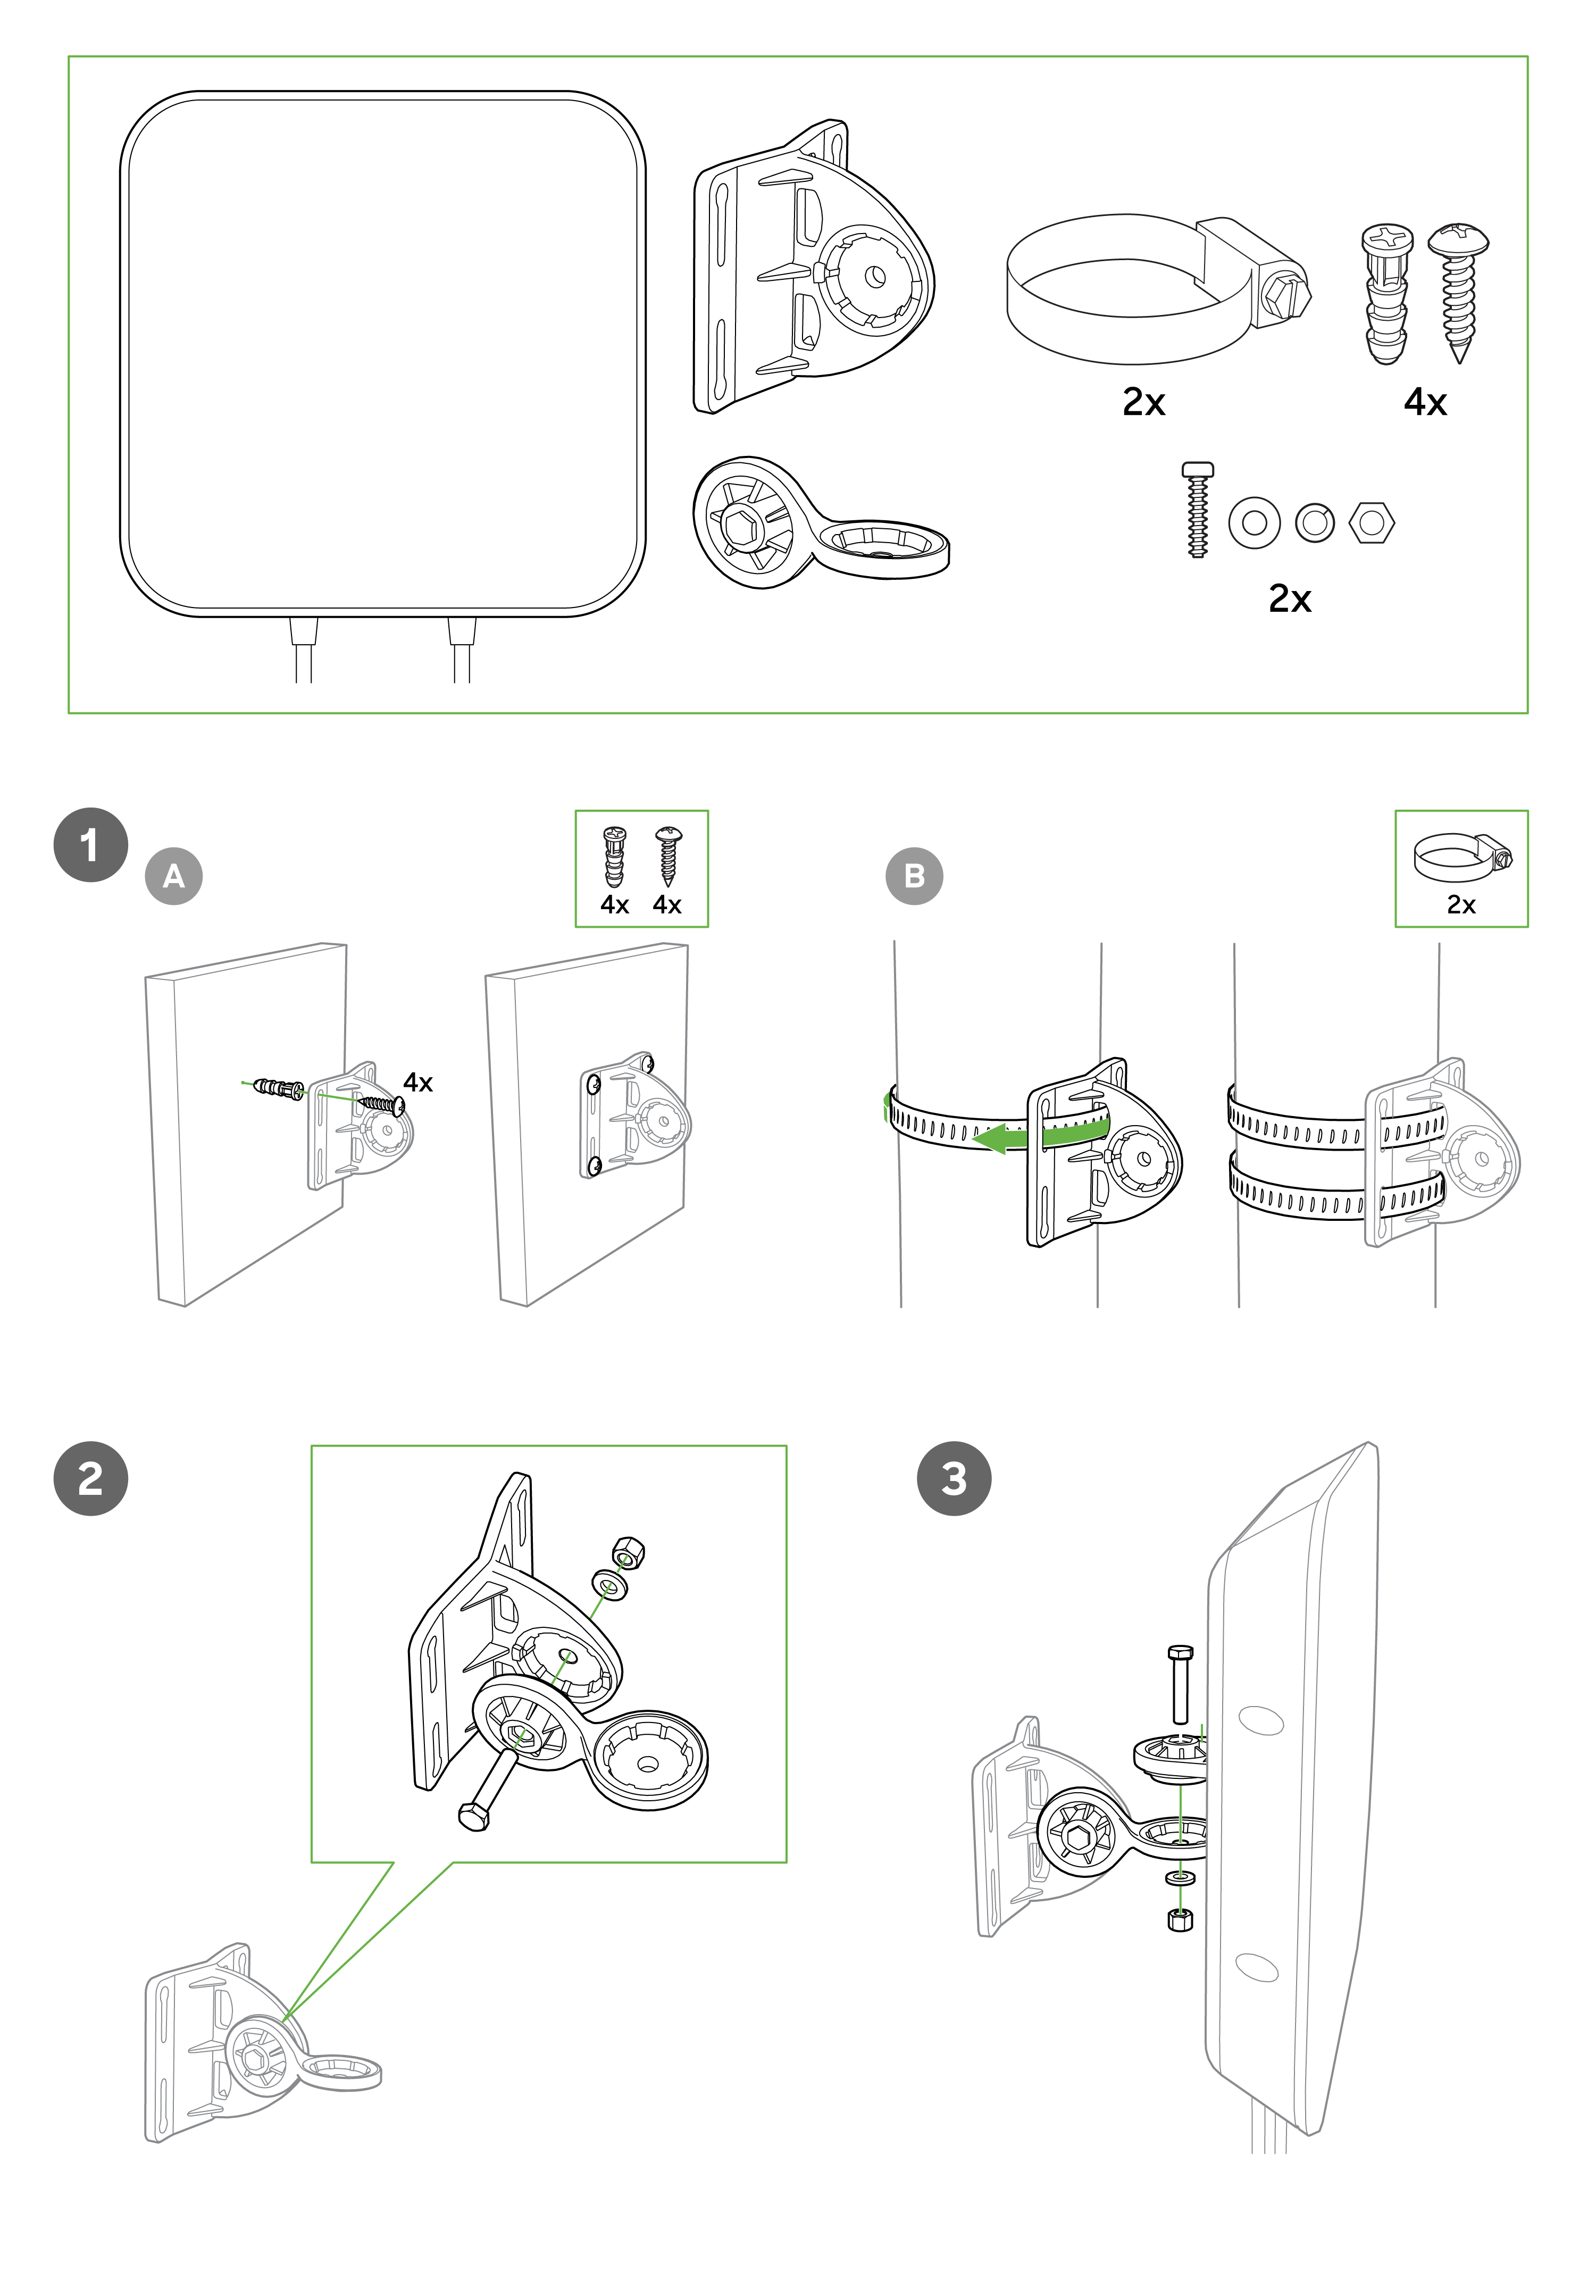 Cellular Patch Antenna - Instructions.png